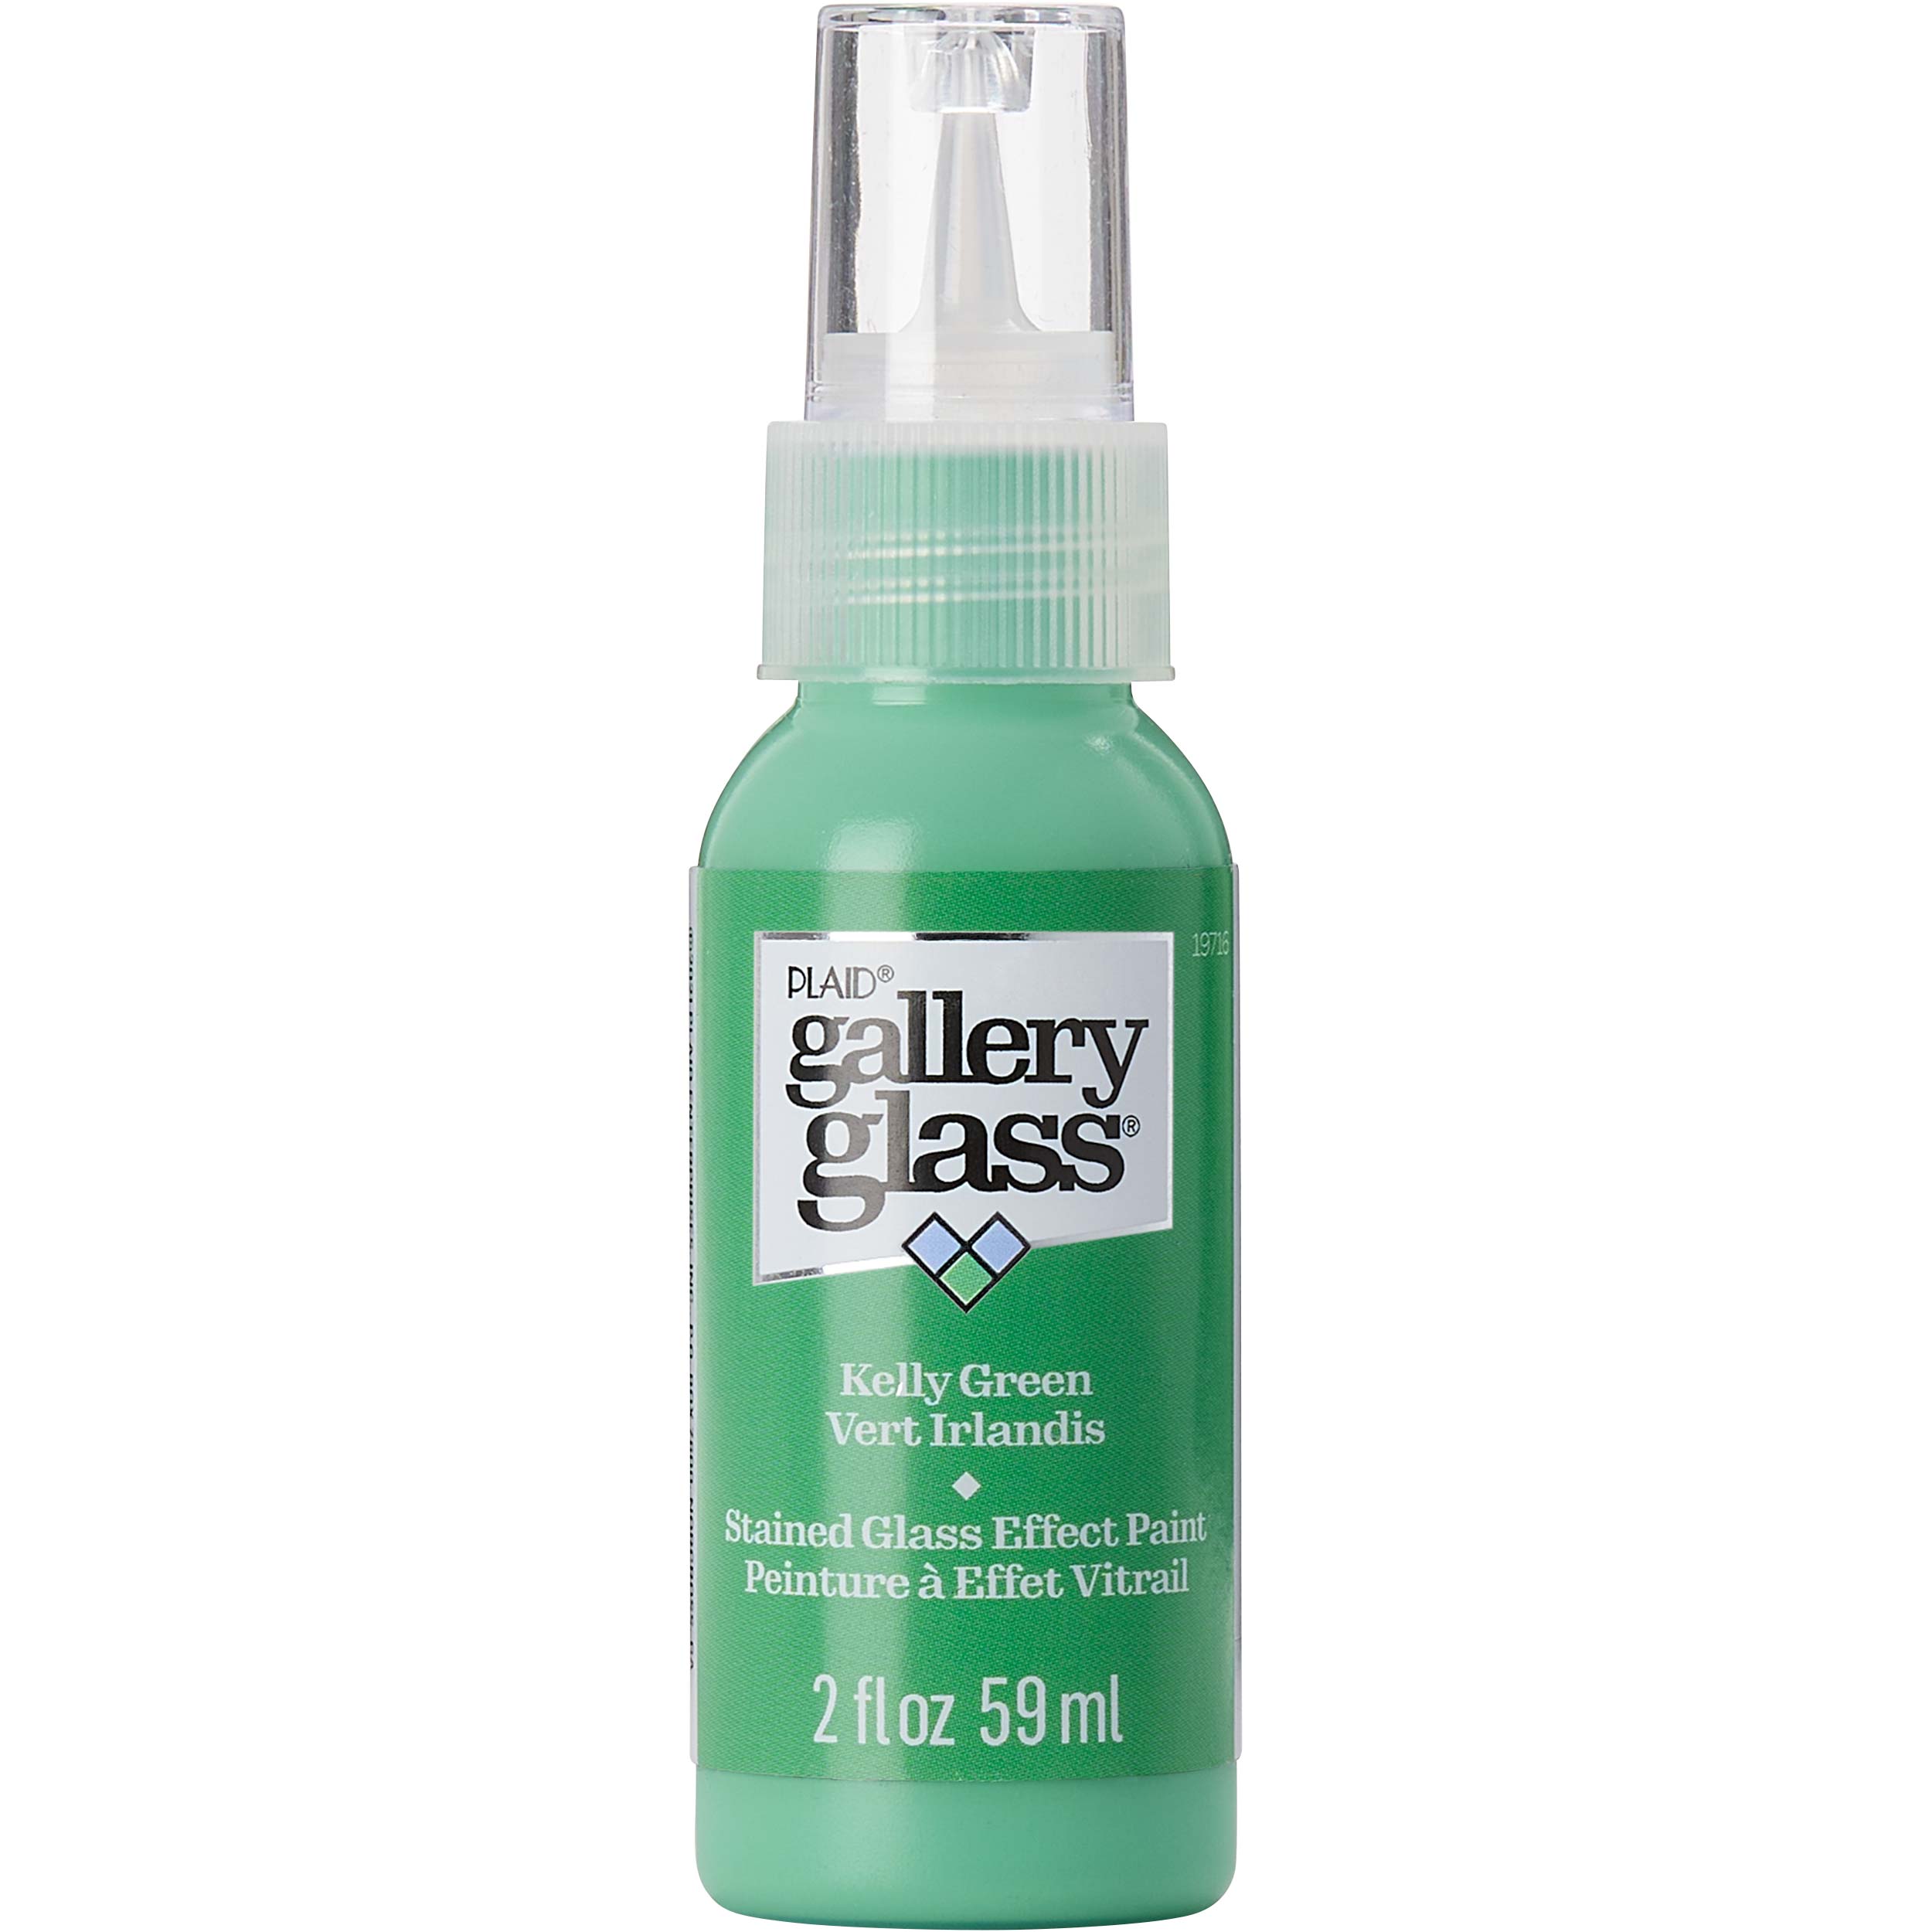 Gallery Glass ® Stained Glass Effect Paint - Kelly Green, 2 oz. - 19716